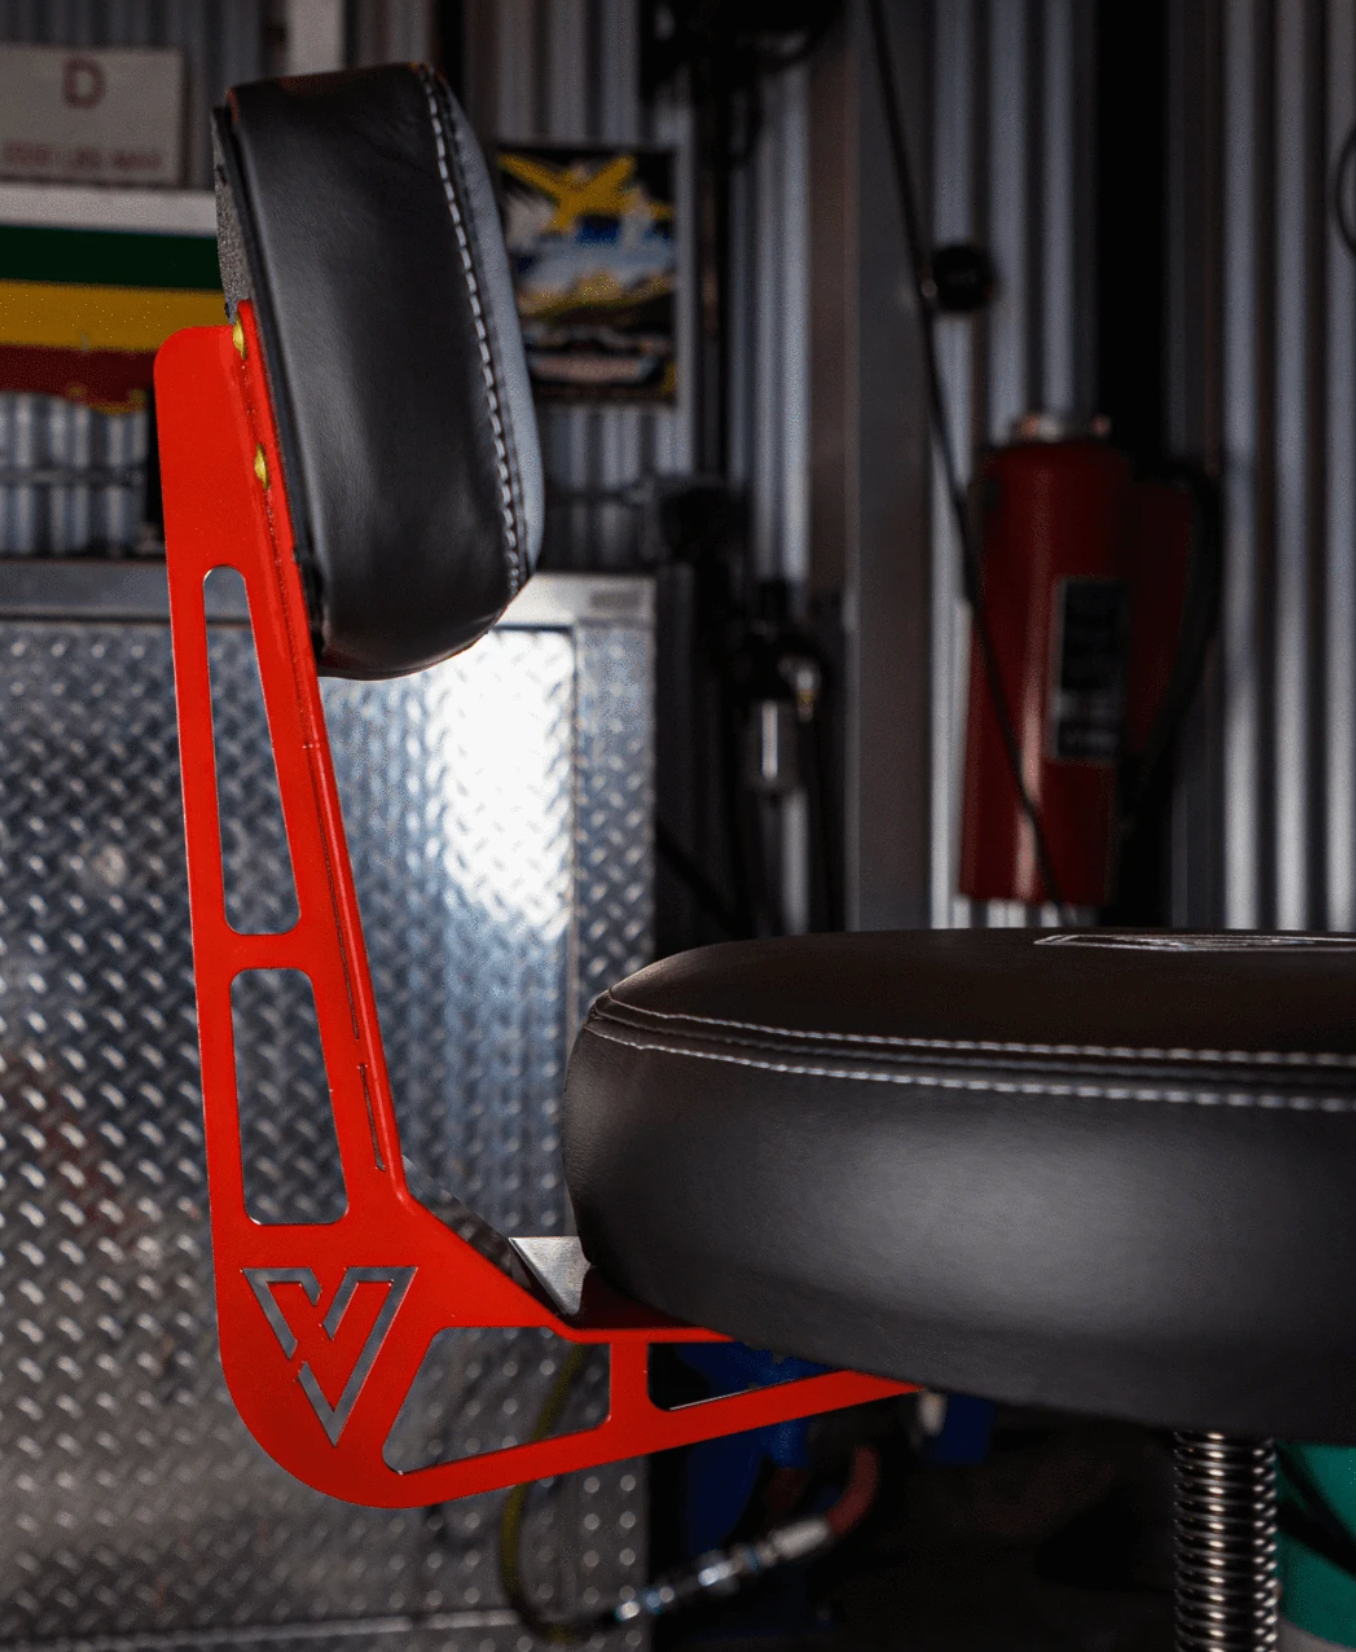 Vyper Chair | Elevated Steel Max RED